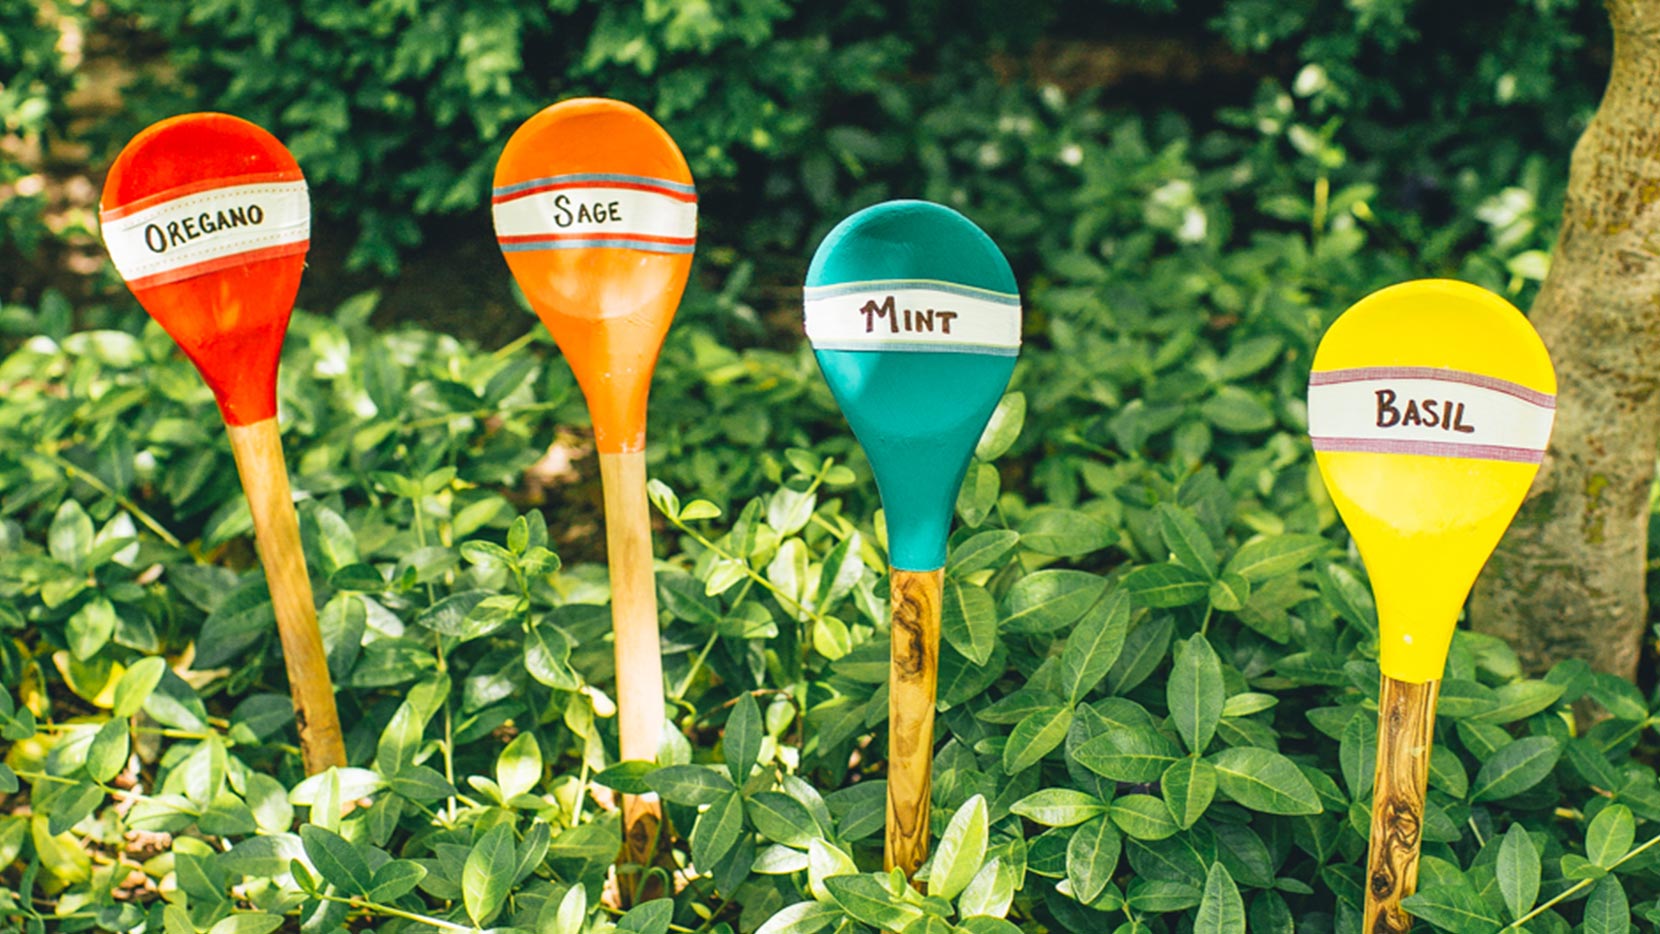 Place wooden spoon in garden next to its corresponding herb